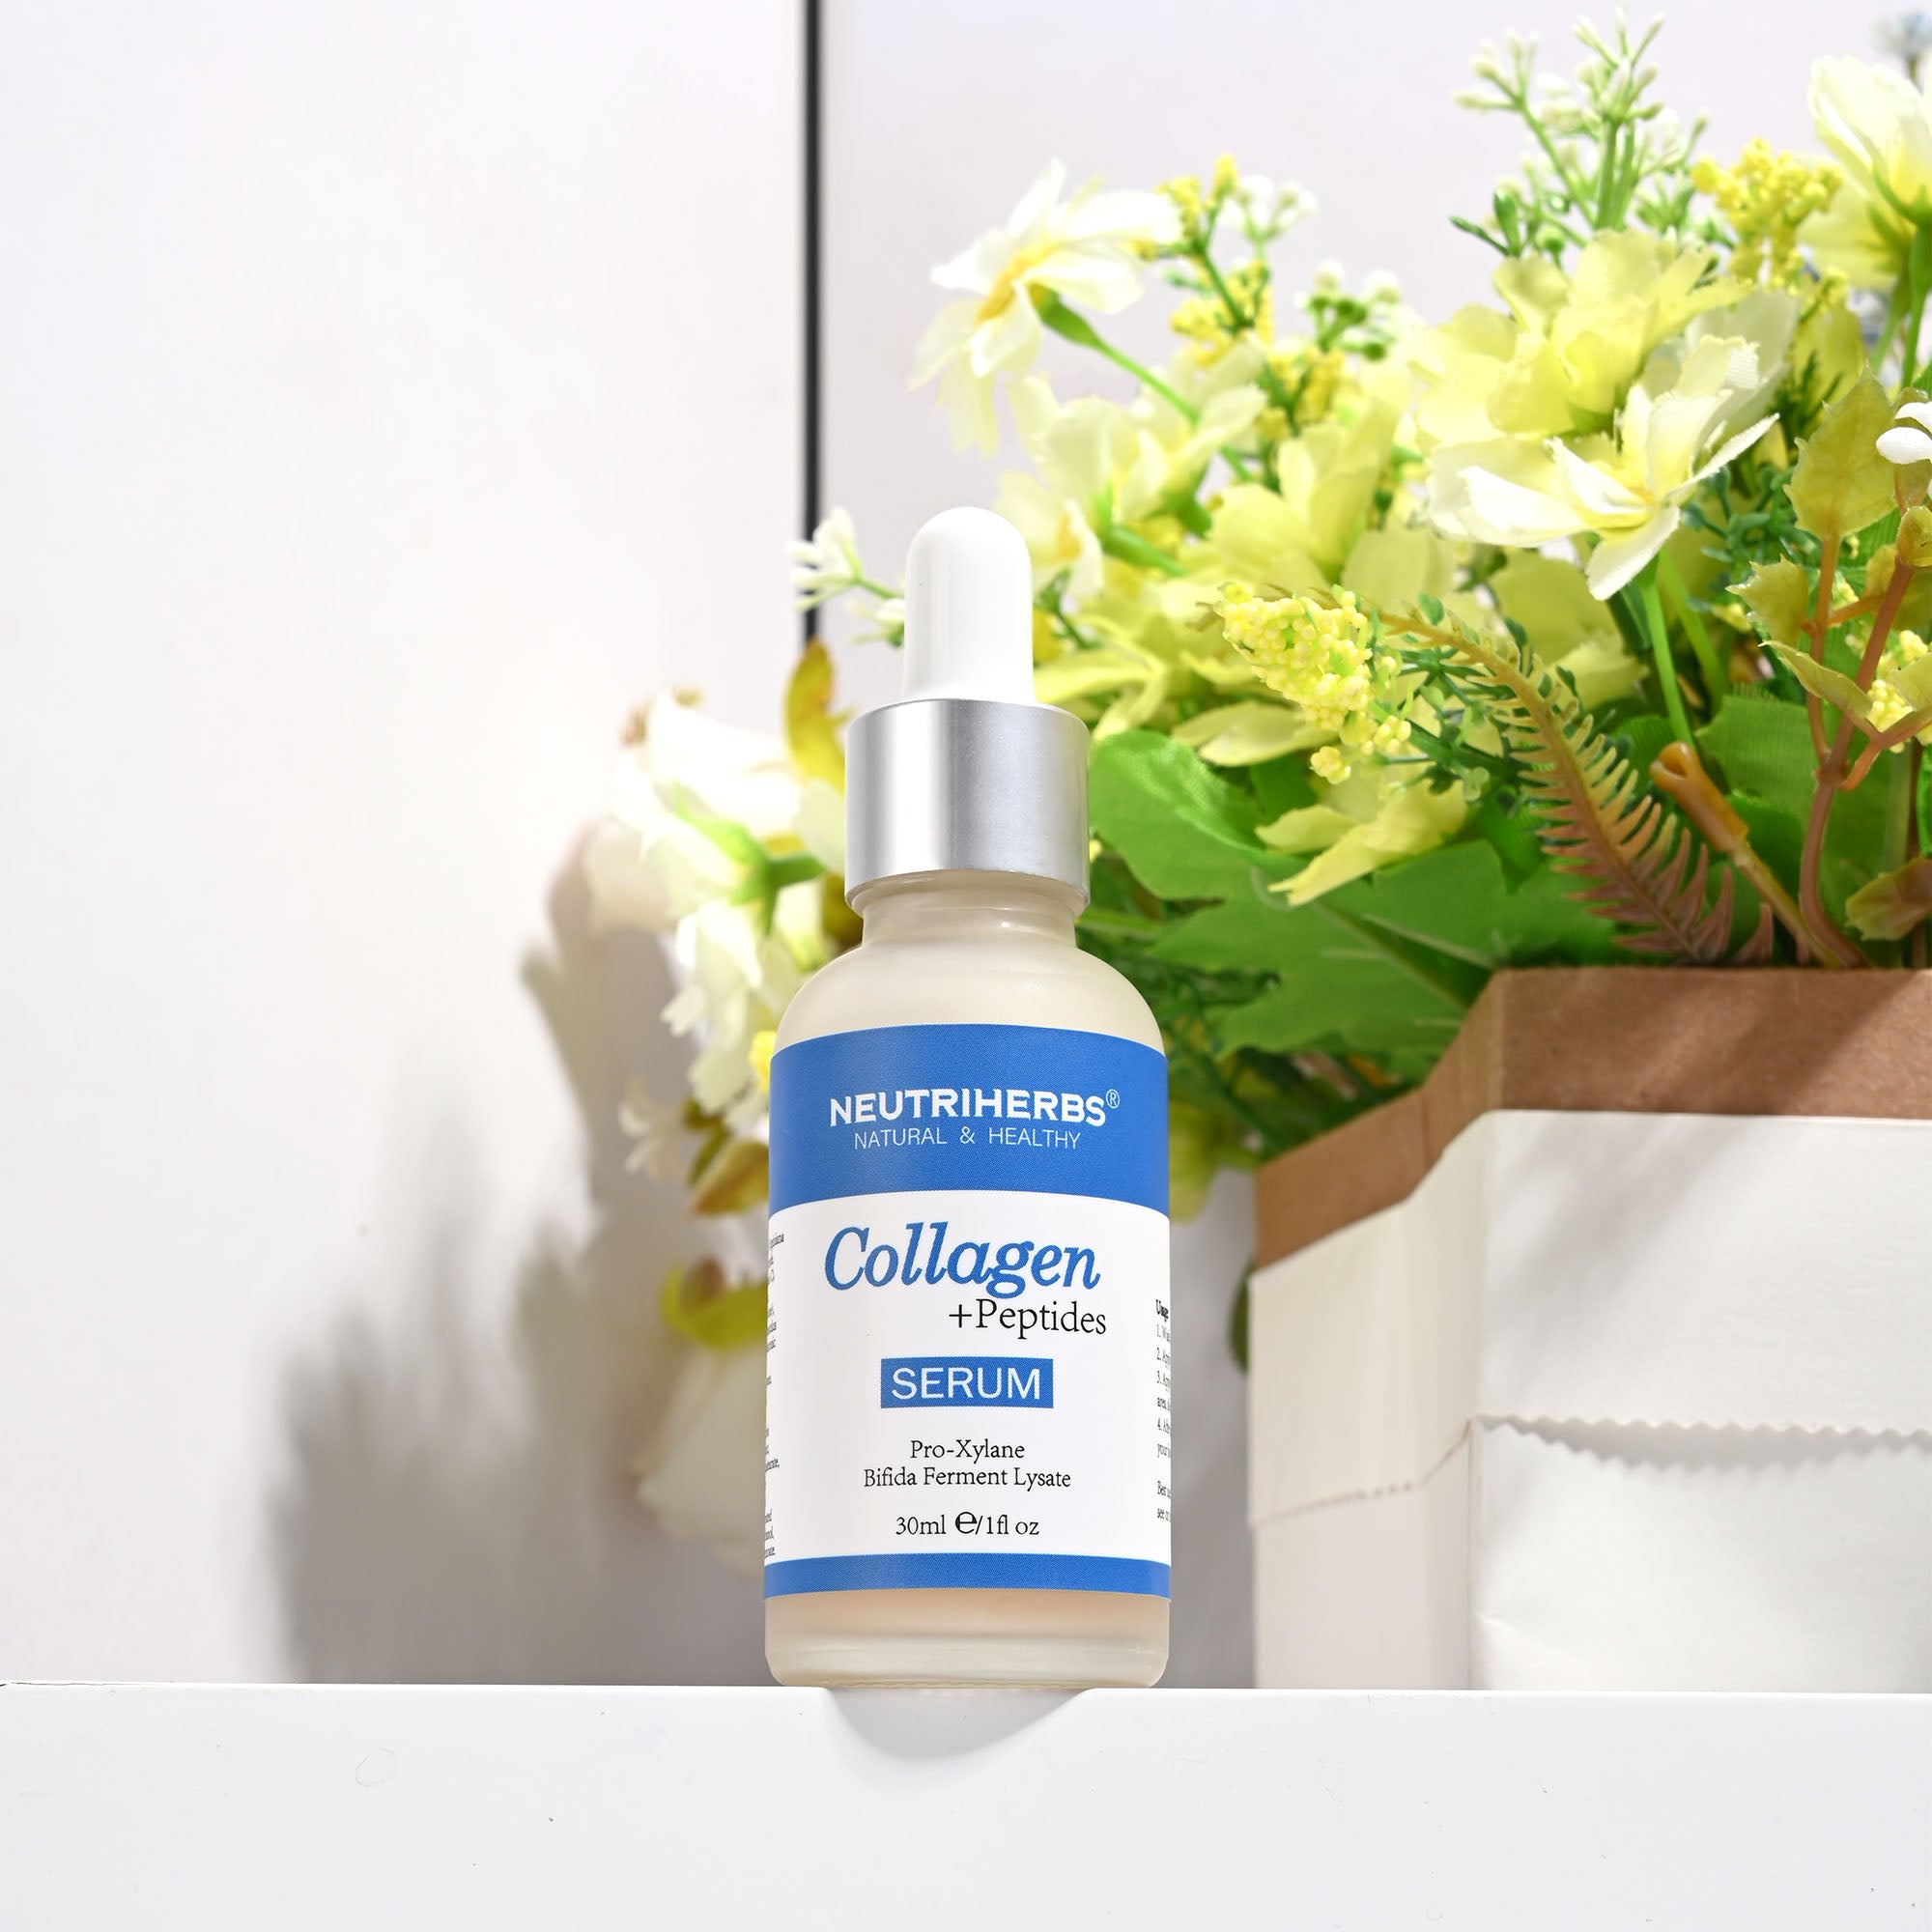 Is Collagen the Rums and Creams' Superhero?